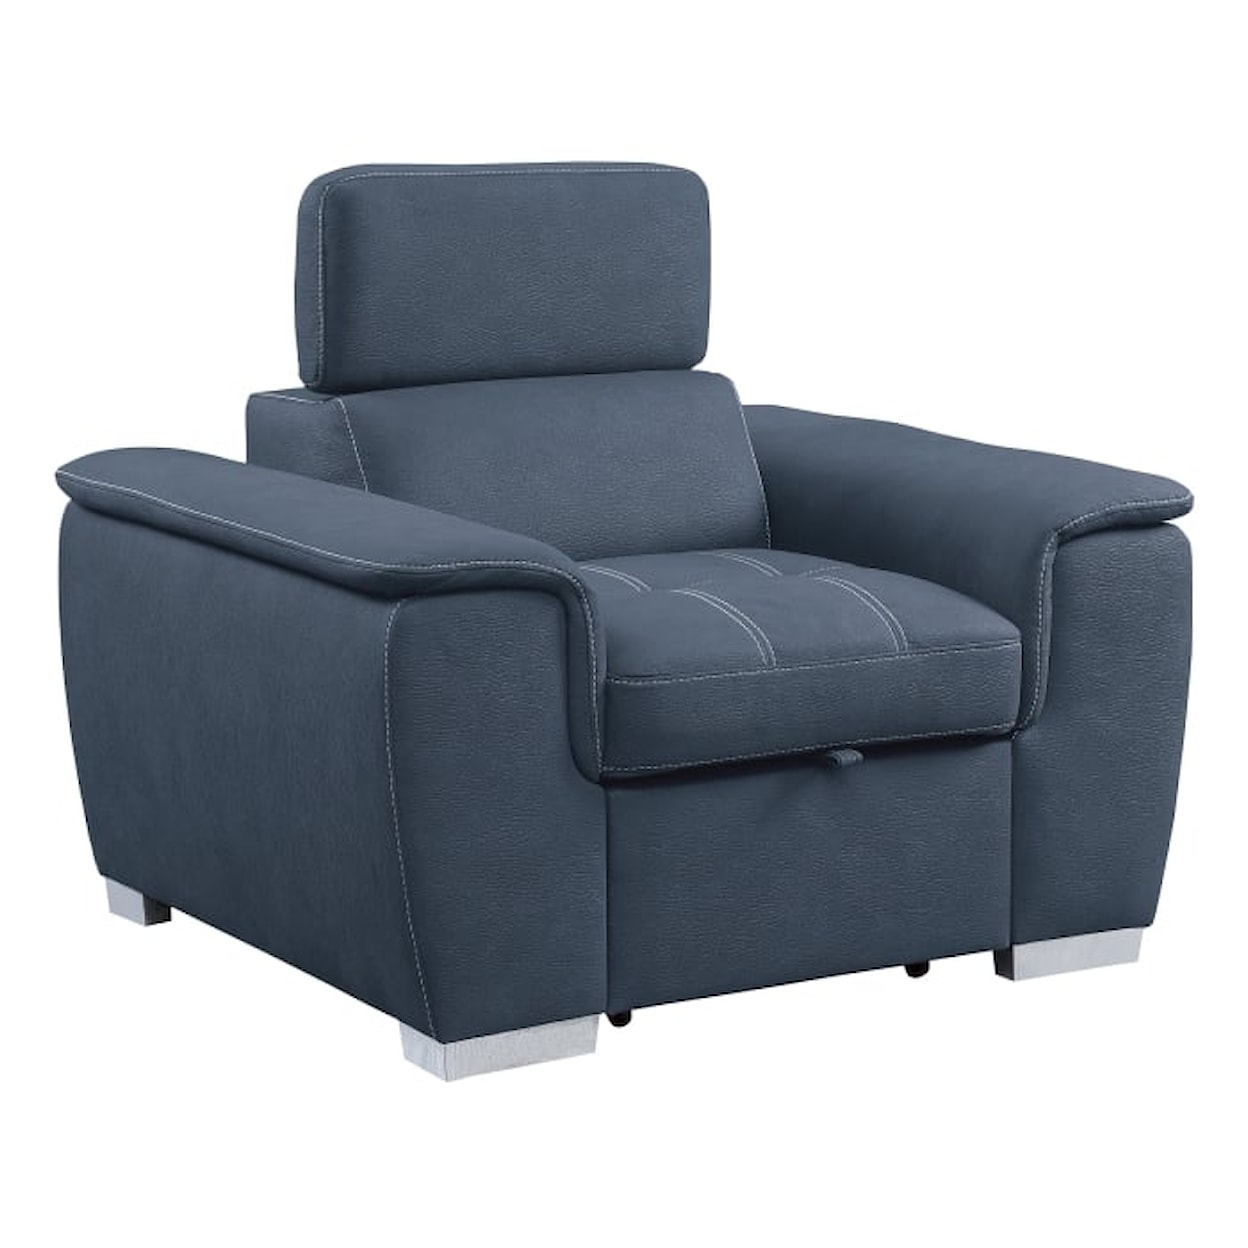 Homelegance Ferriday Chair with Pull-out Ottoman